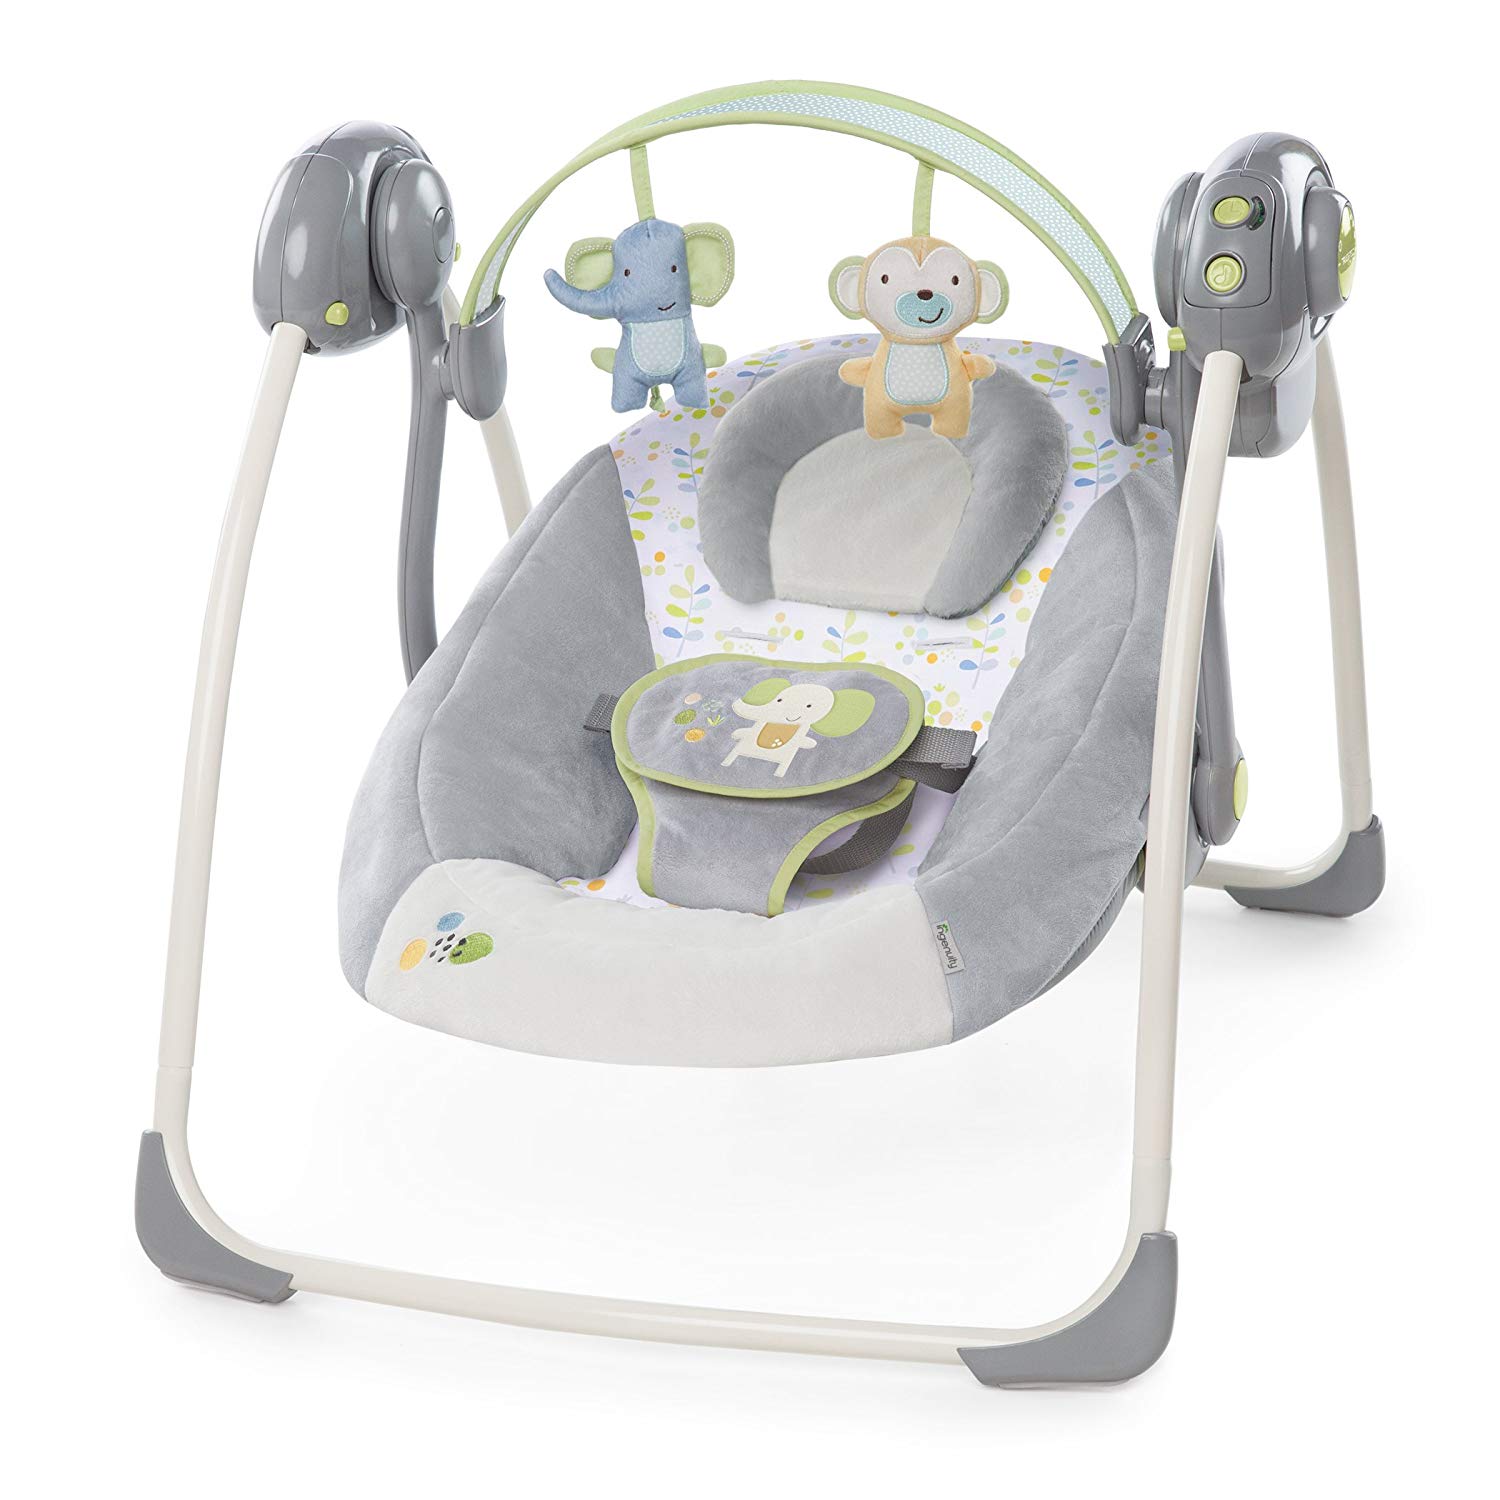 Bright Starts Soothe and Delight Portable Swing